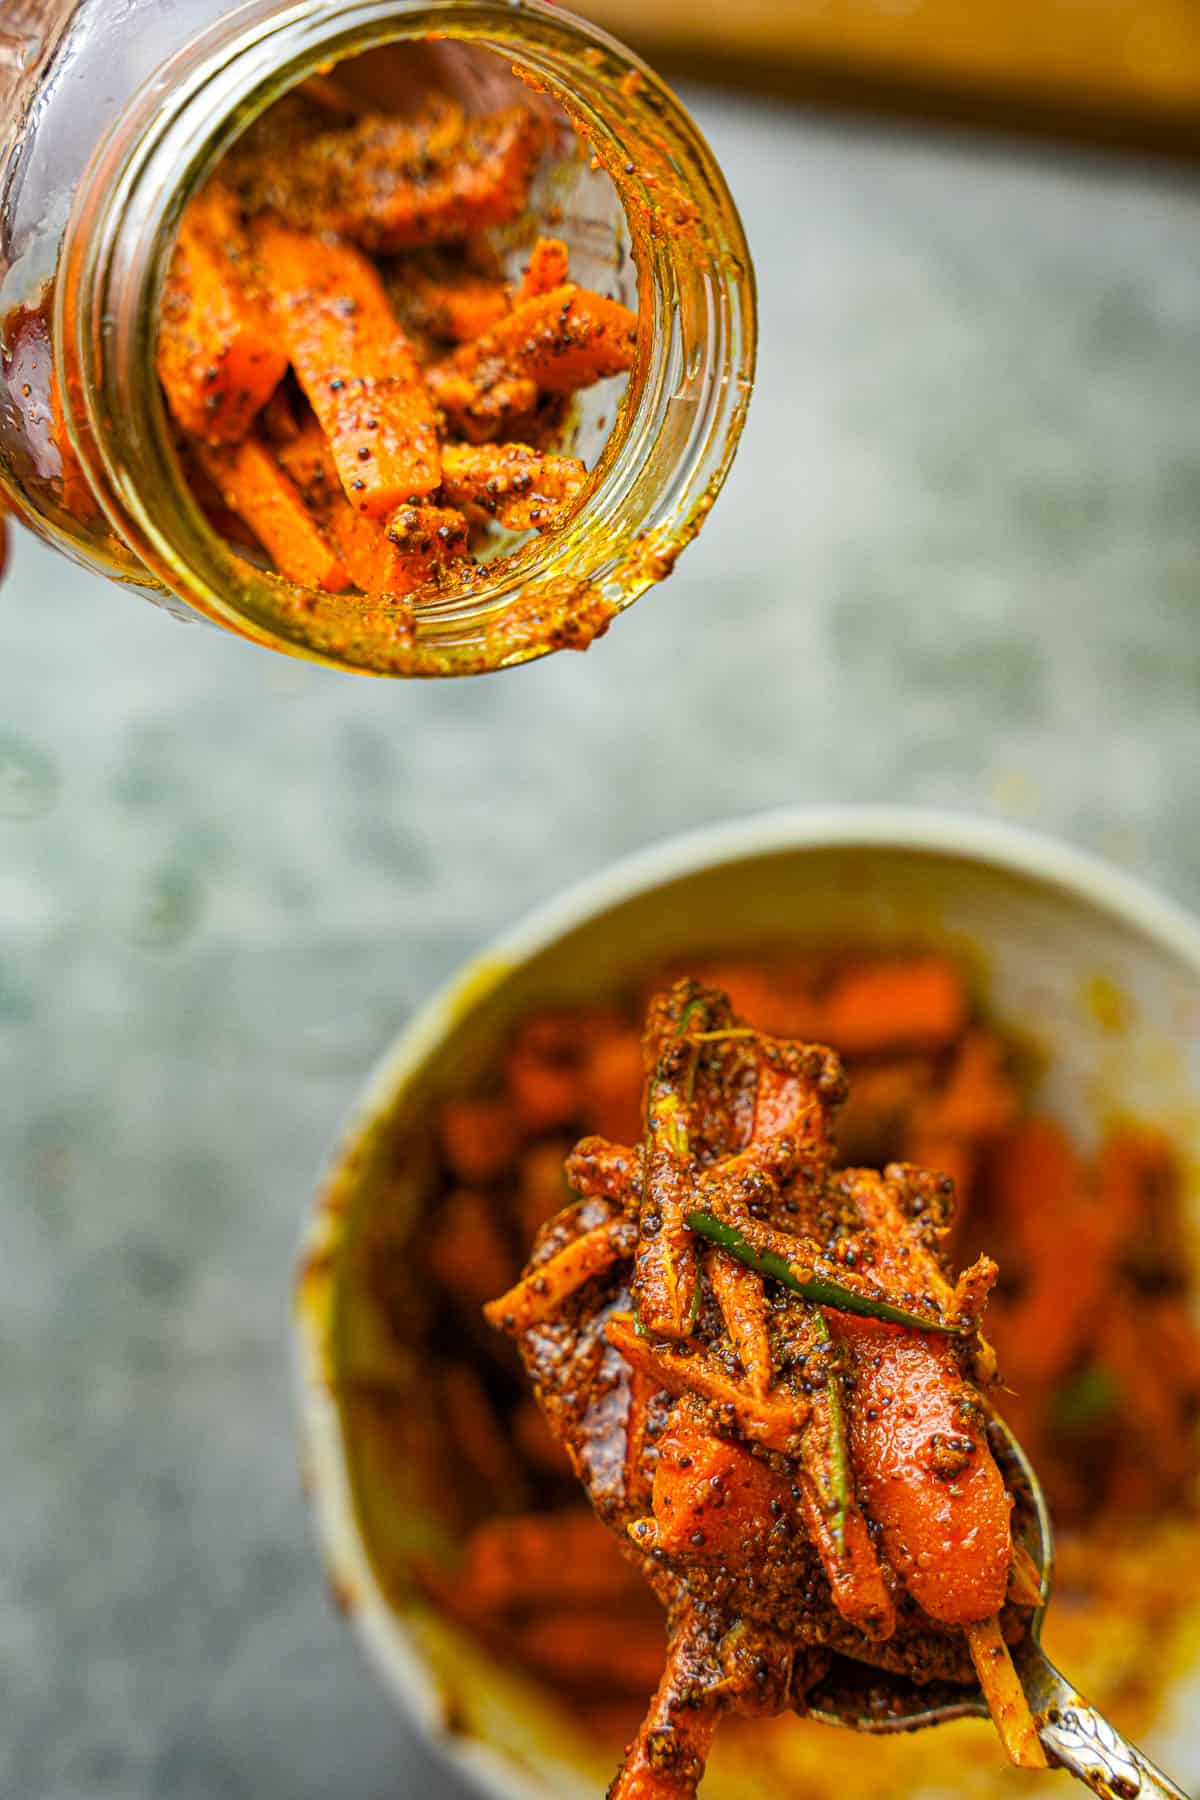 Carrot pickle is loaded into a jar with a metal spoon.